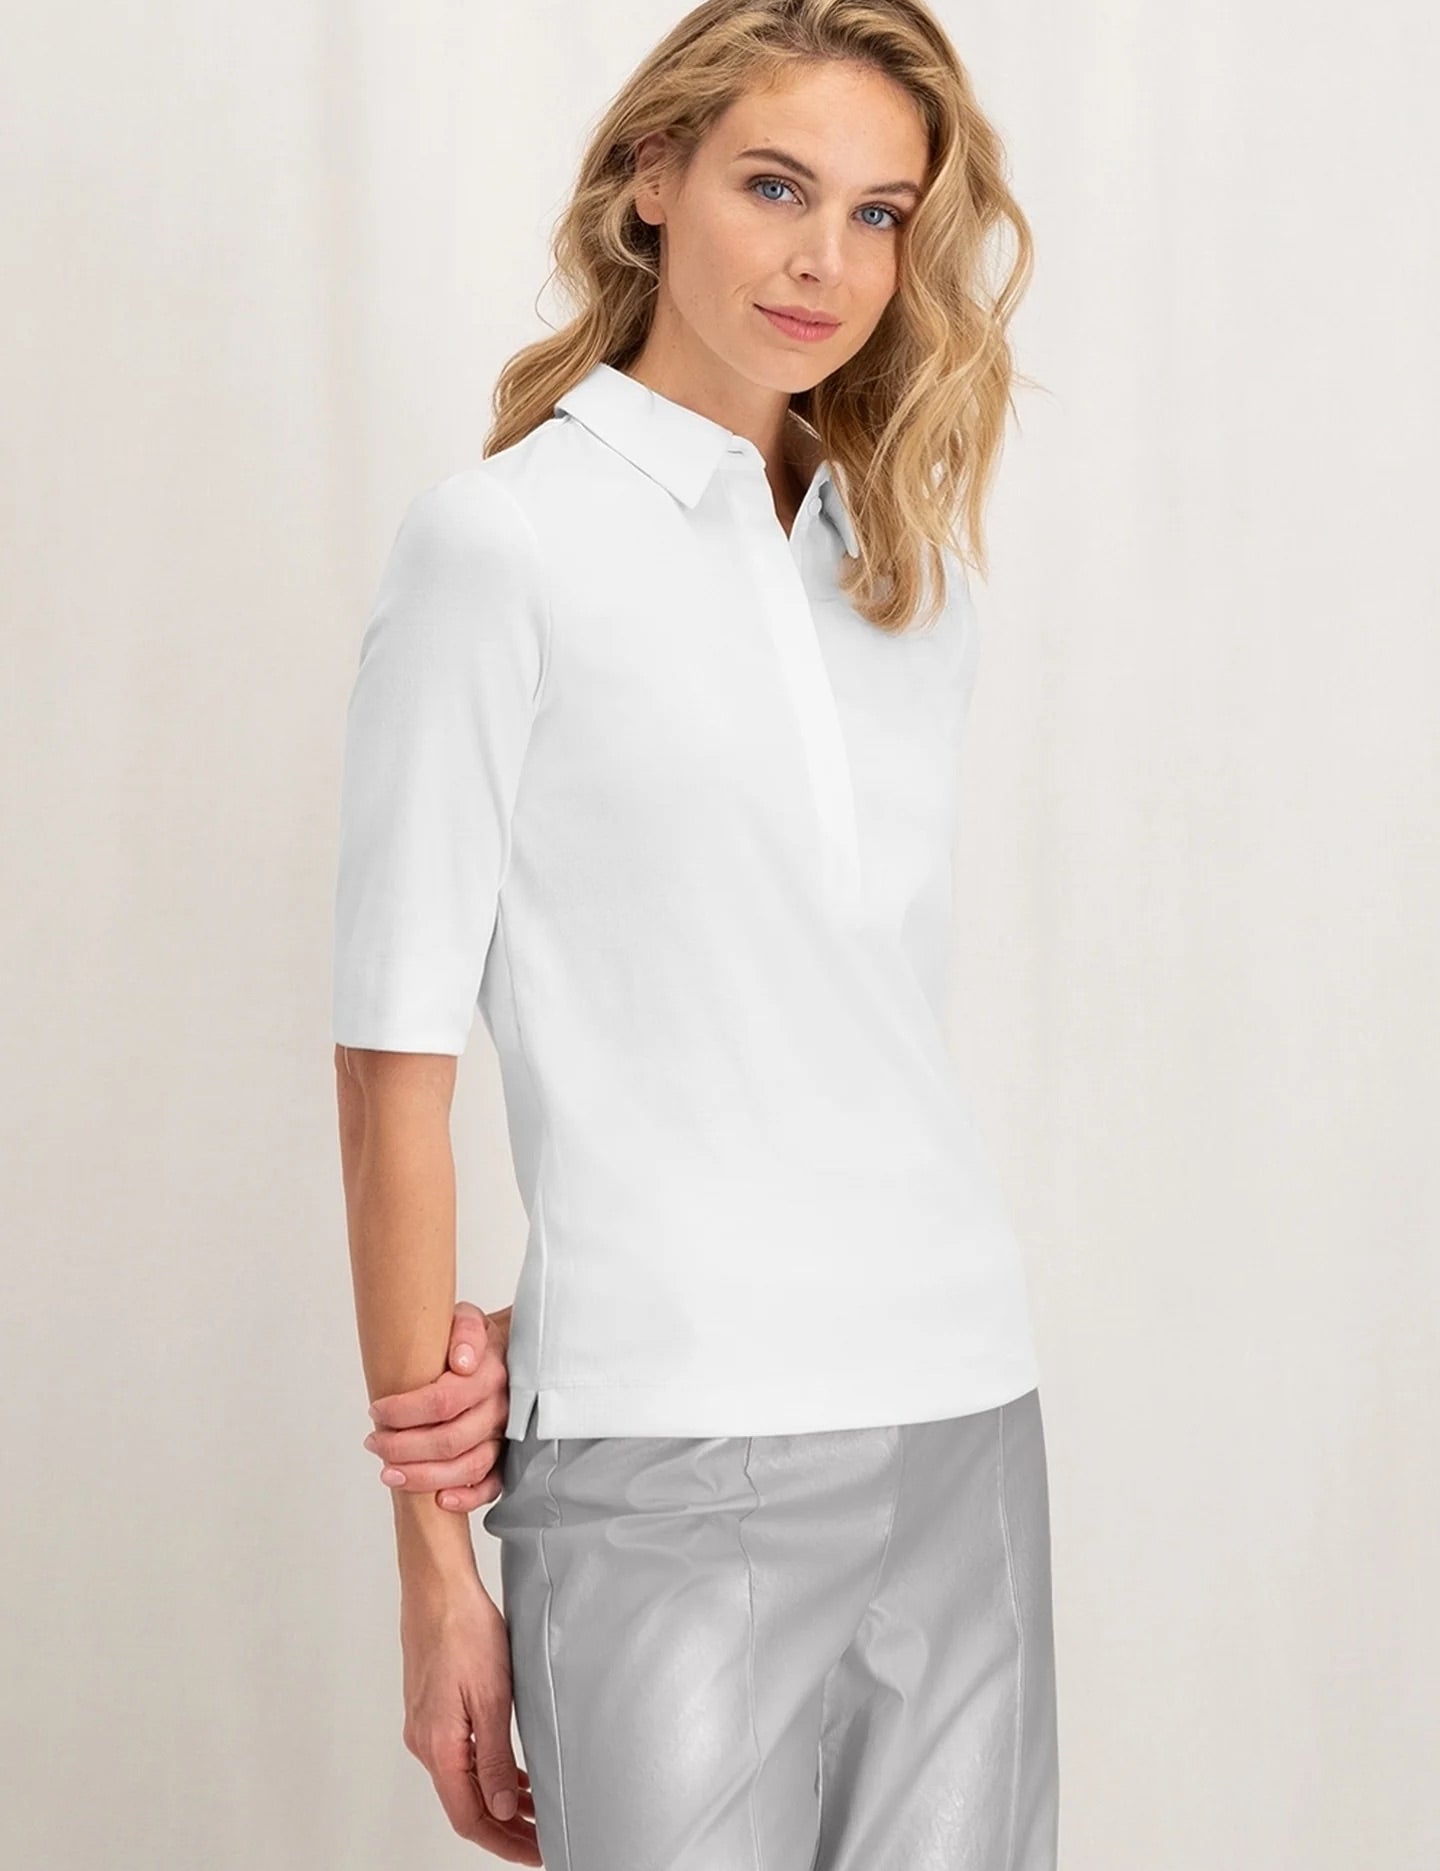 polo-top-with-buttons-and-half-long-sleeves-in-regular-fit-pure-white_2880x_jpg.jpg